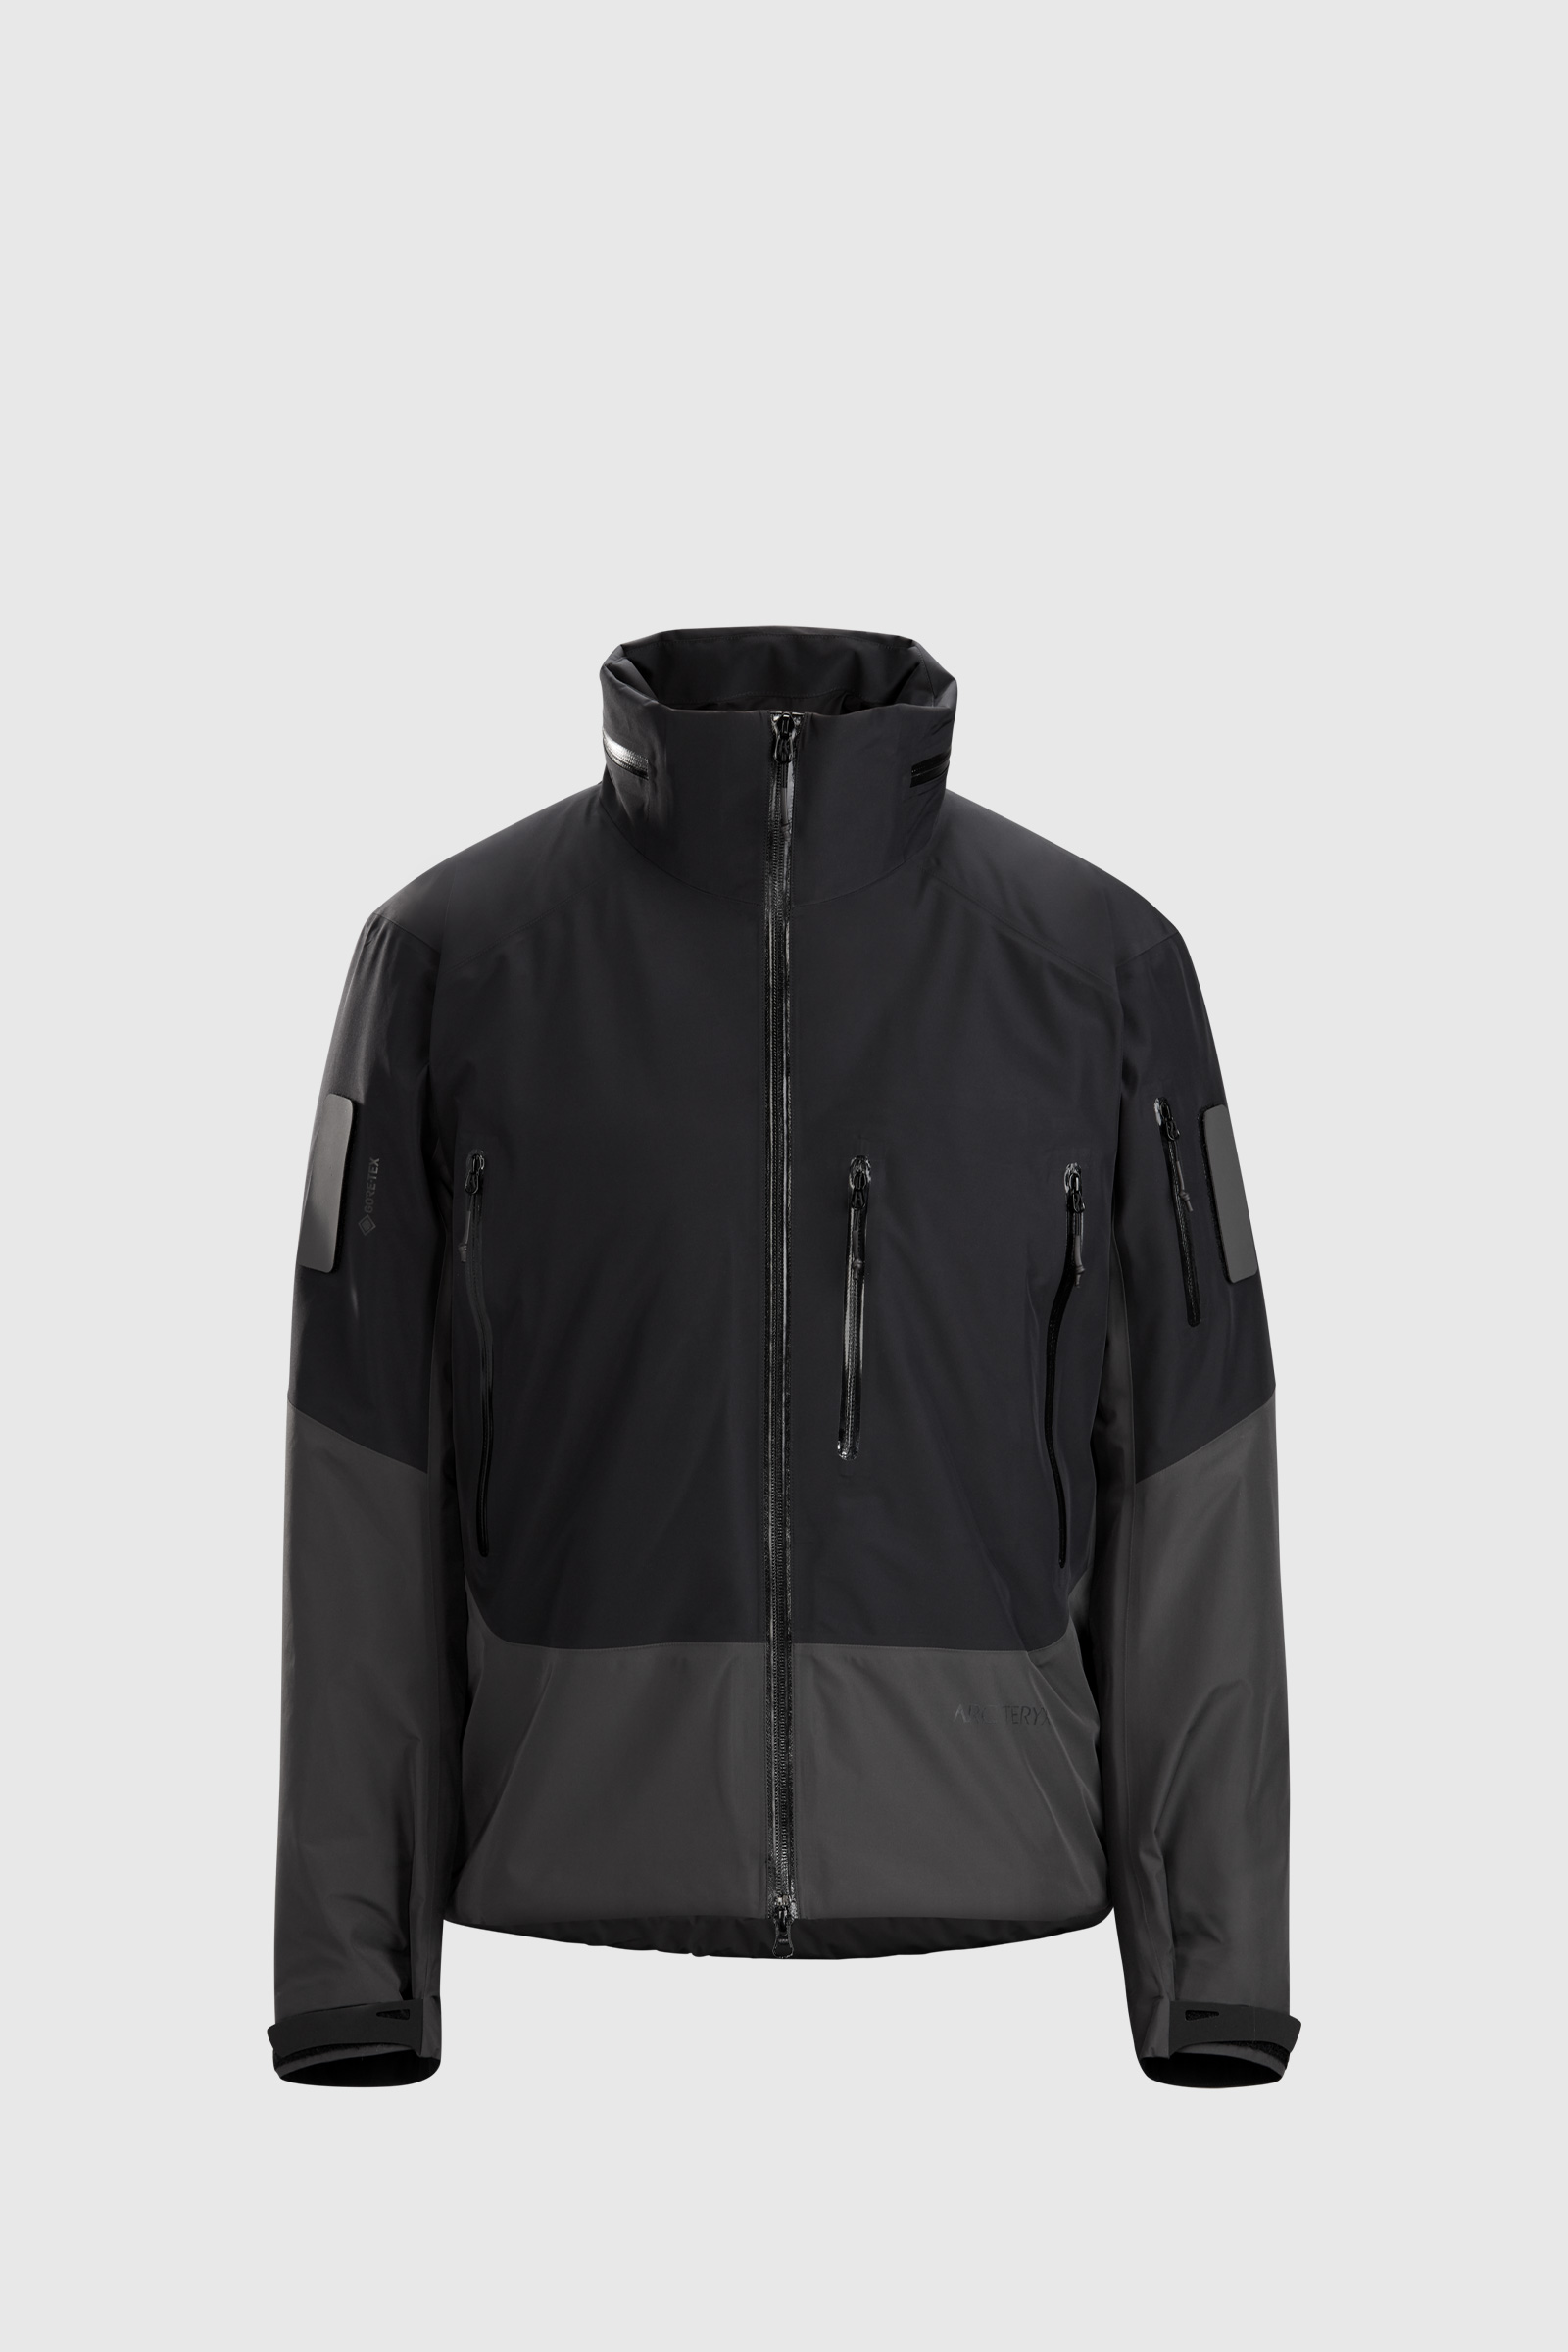 arc'teryx system_a AXIS INSULATED ANORAK着丈等教えて頂けないでしょ ...